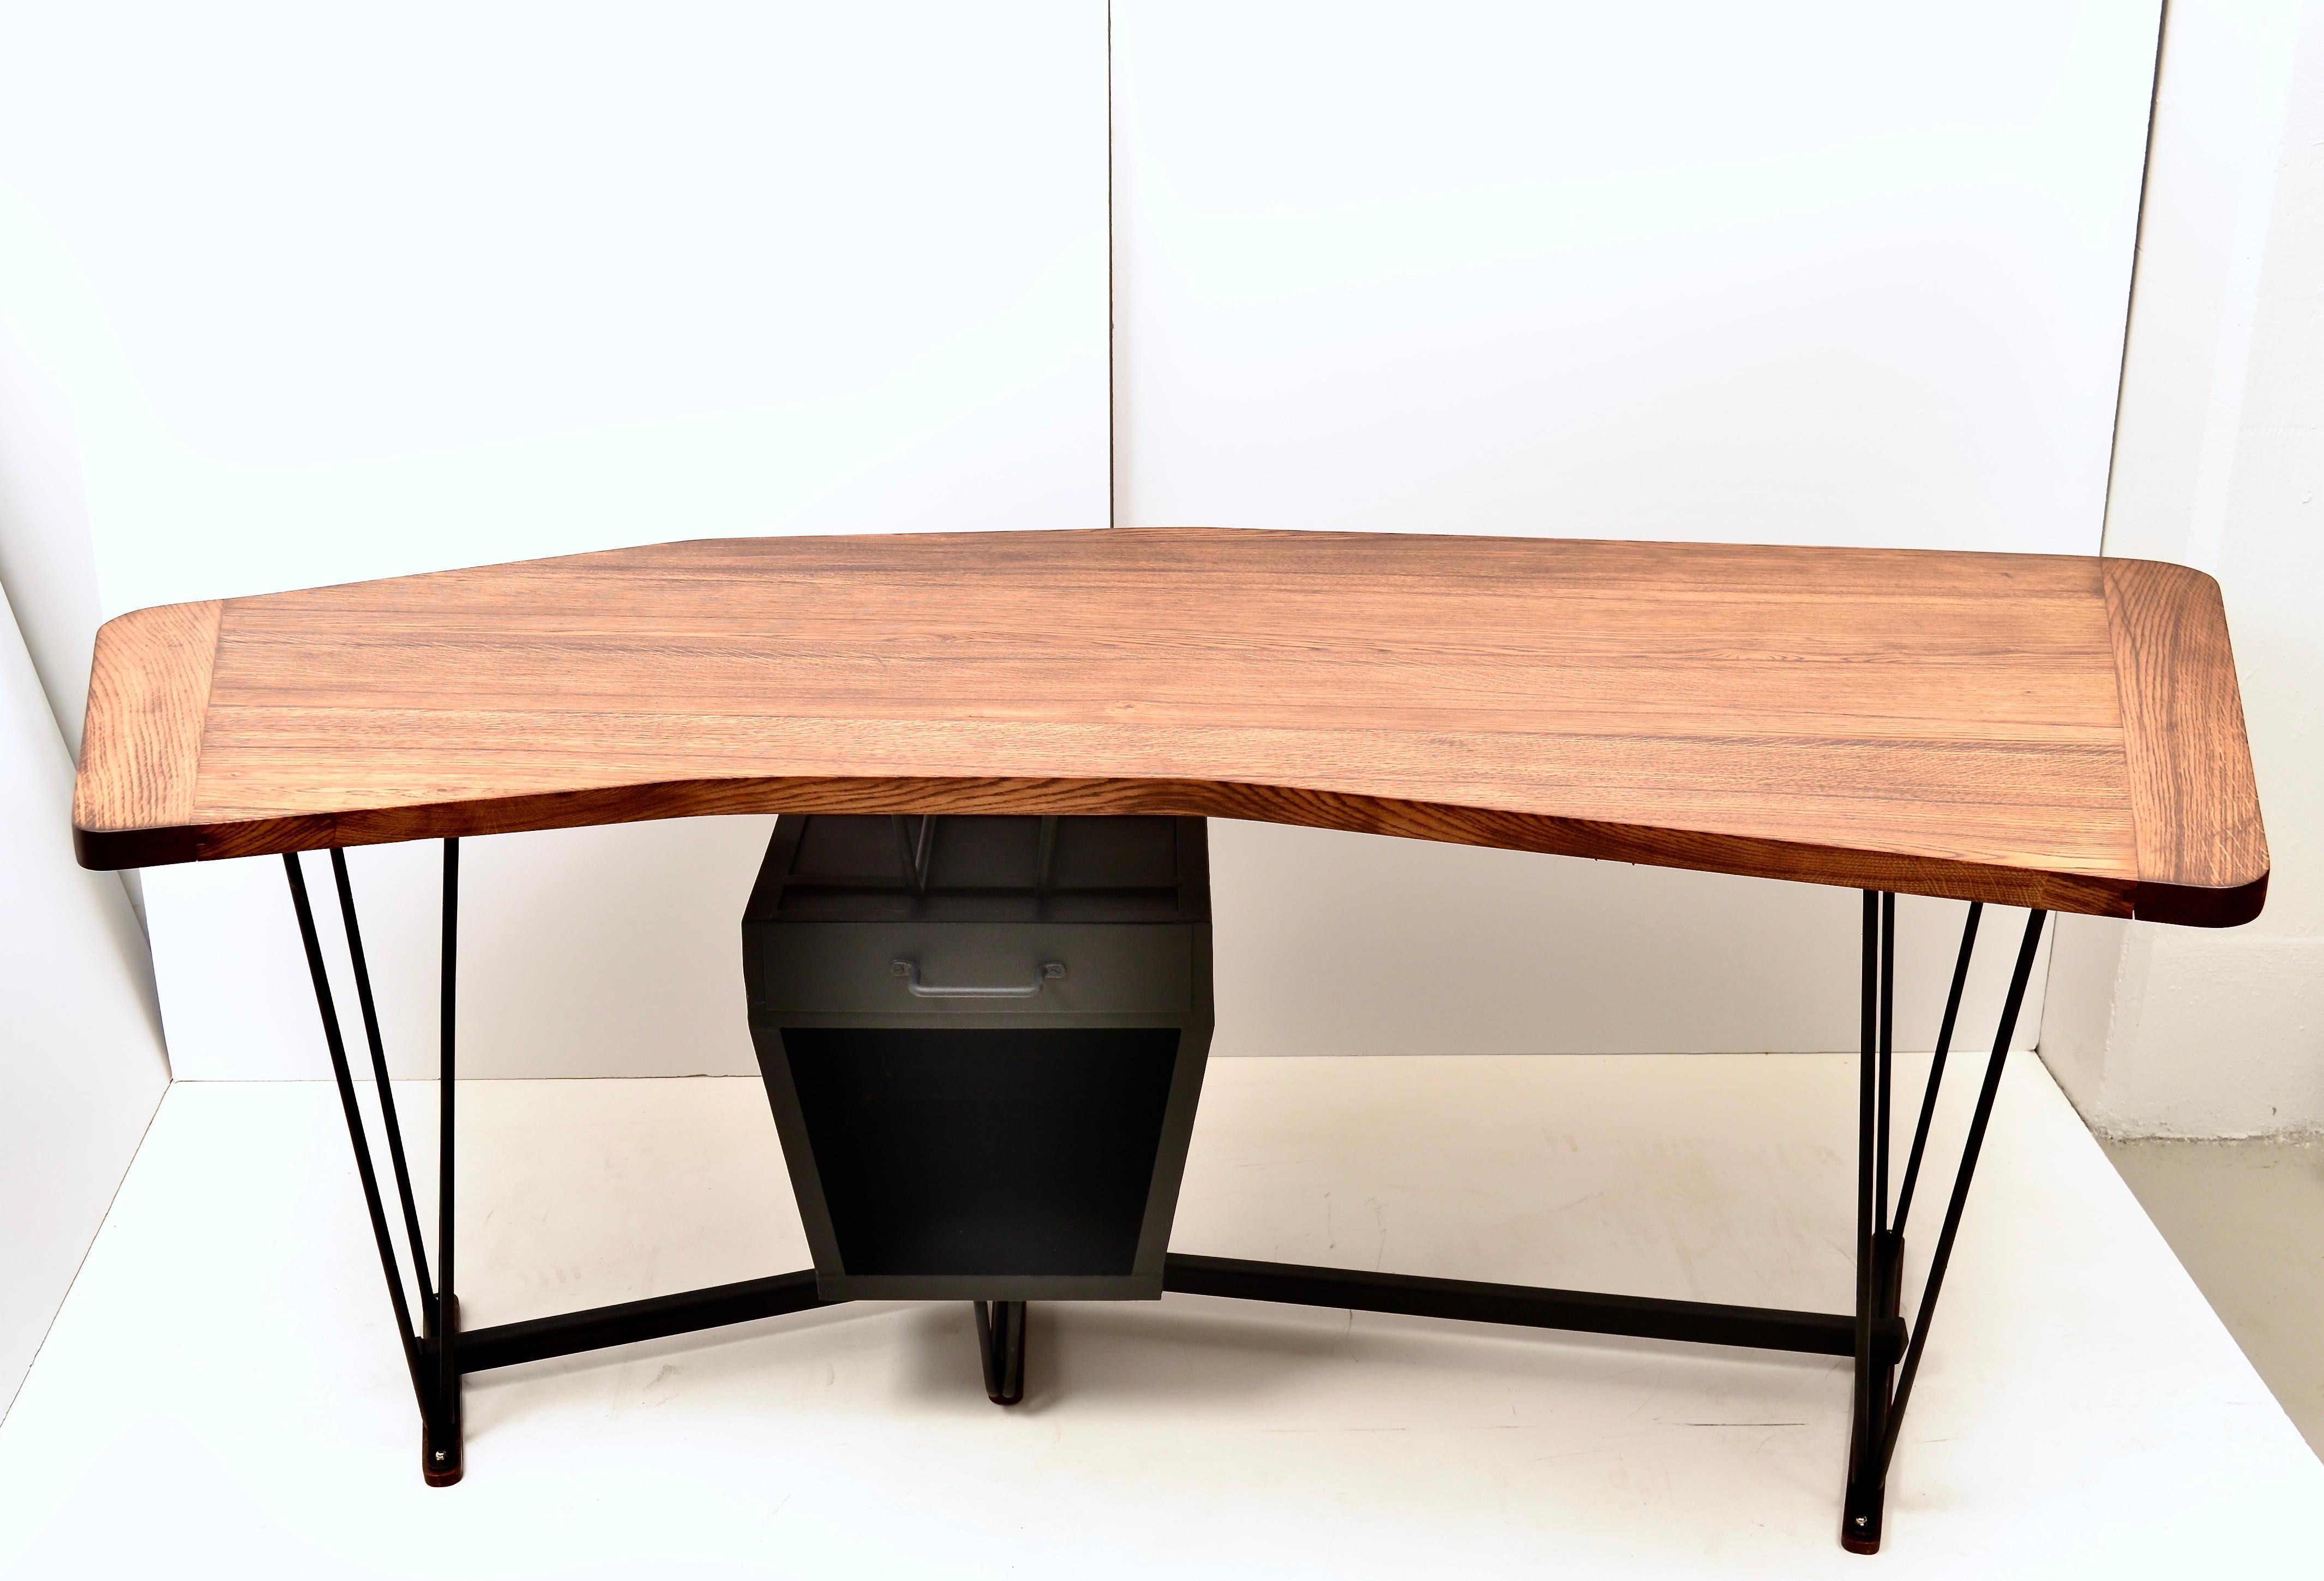 A real statement piece, this French early modernism desk features a boomerang shaped top in solid oak. The distinctive iron base hold a storage space topped with a single drawer. The oak top has been newly restored using matte finish. The iron base